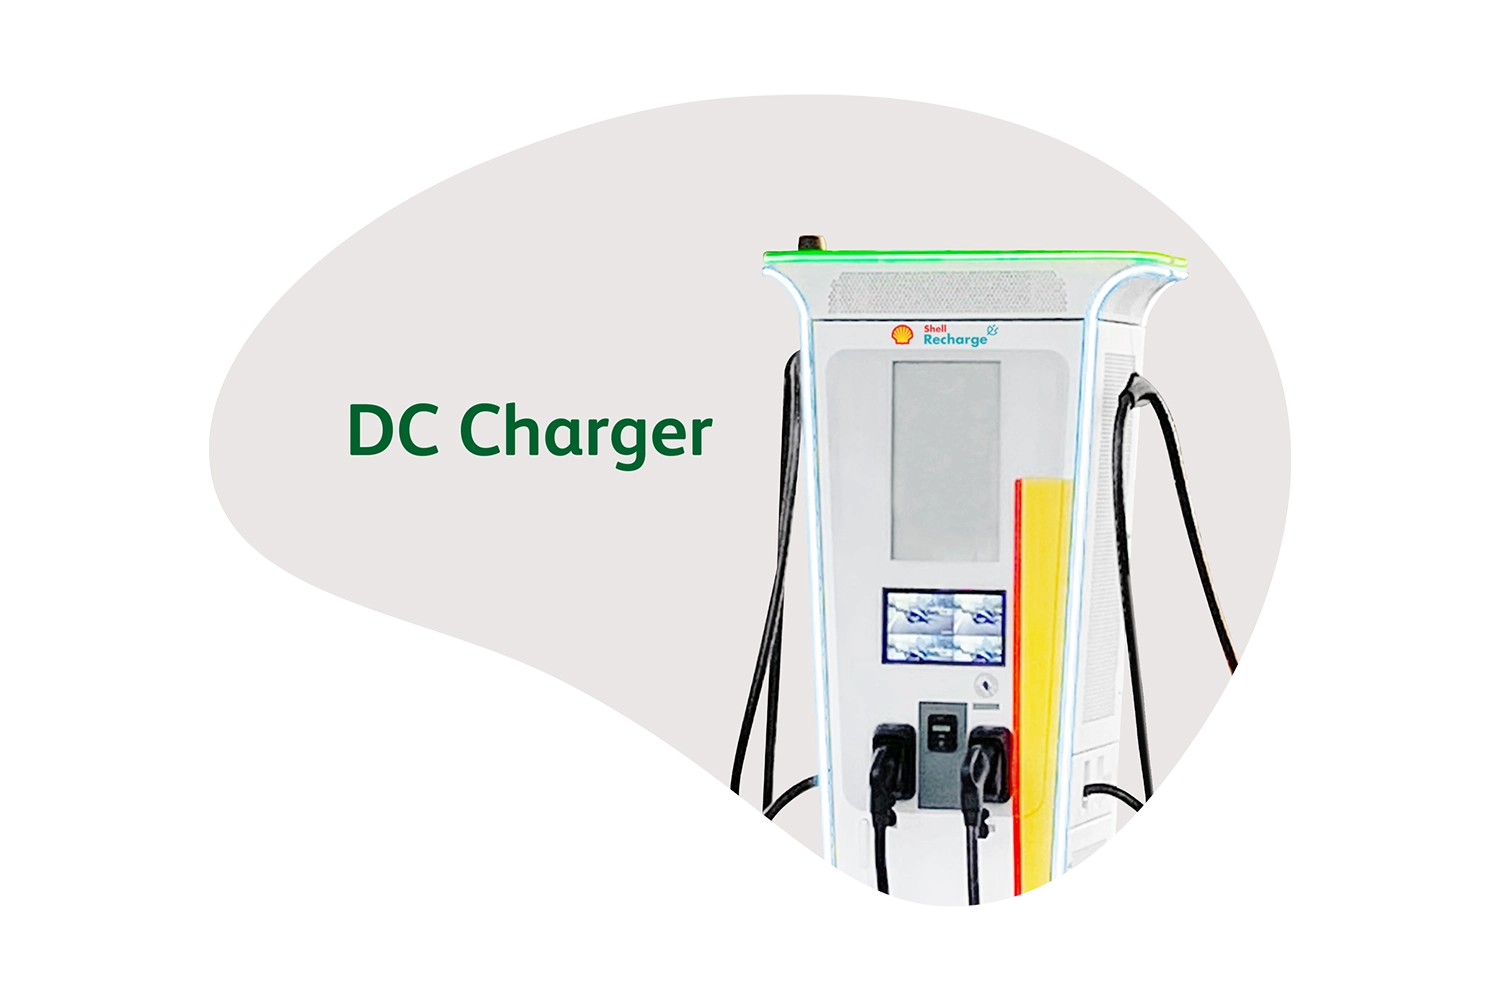 Illustration of a ubitricity / Shell Recharge rapid charger which can be used by local authorities to provide quick recharging for residents.